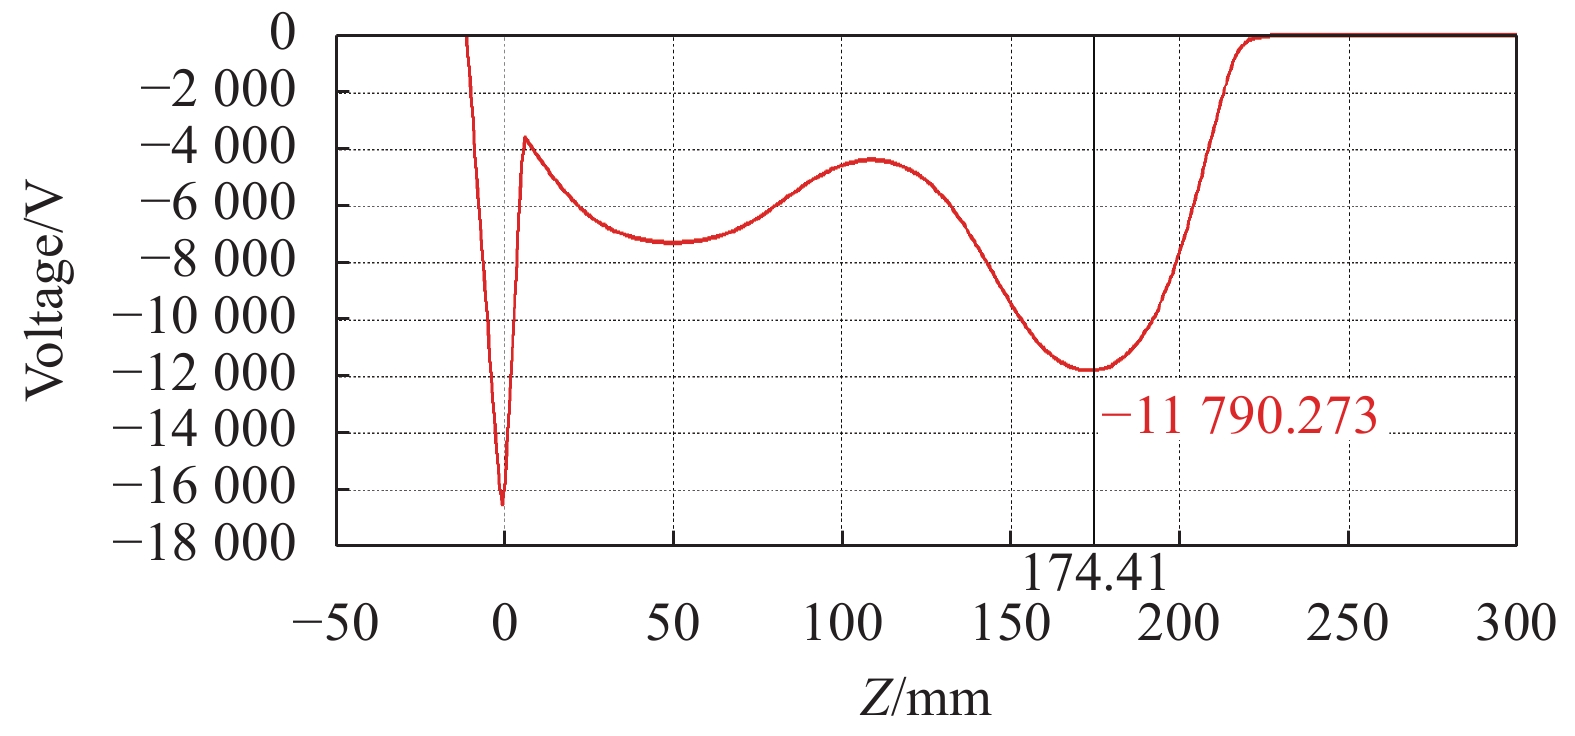 Voltage distribution on the axis of the streak tube